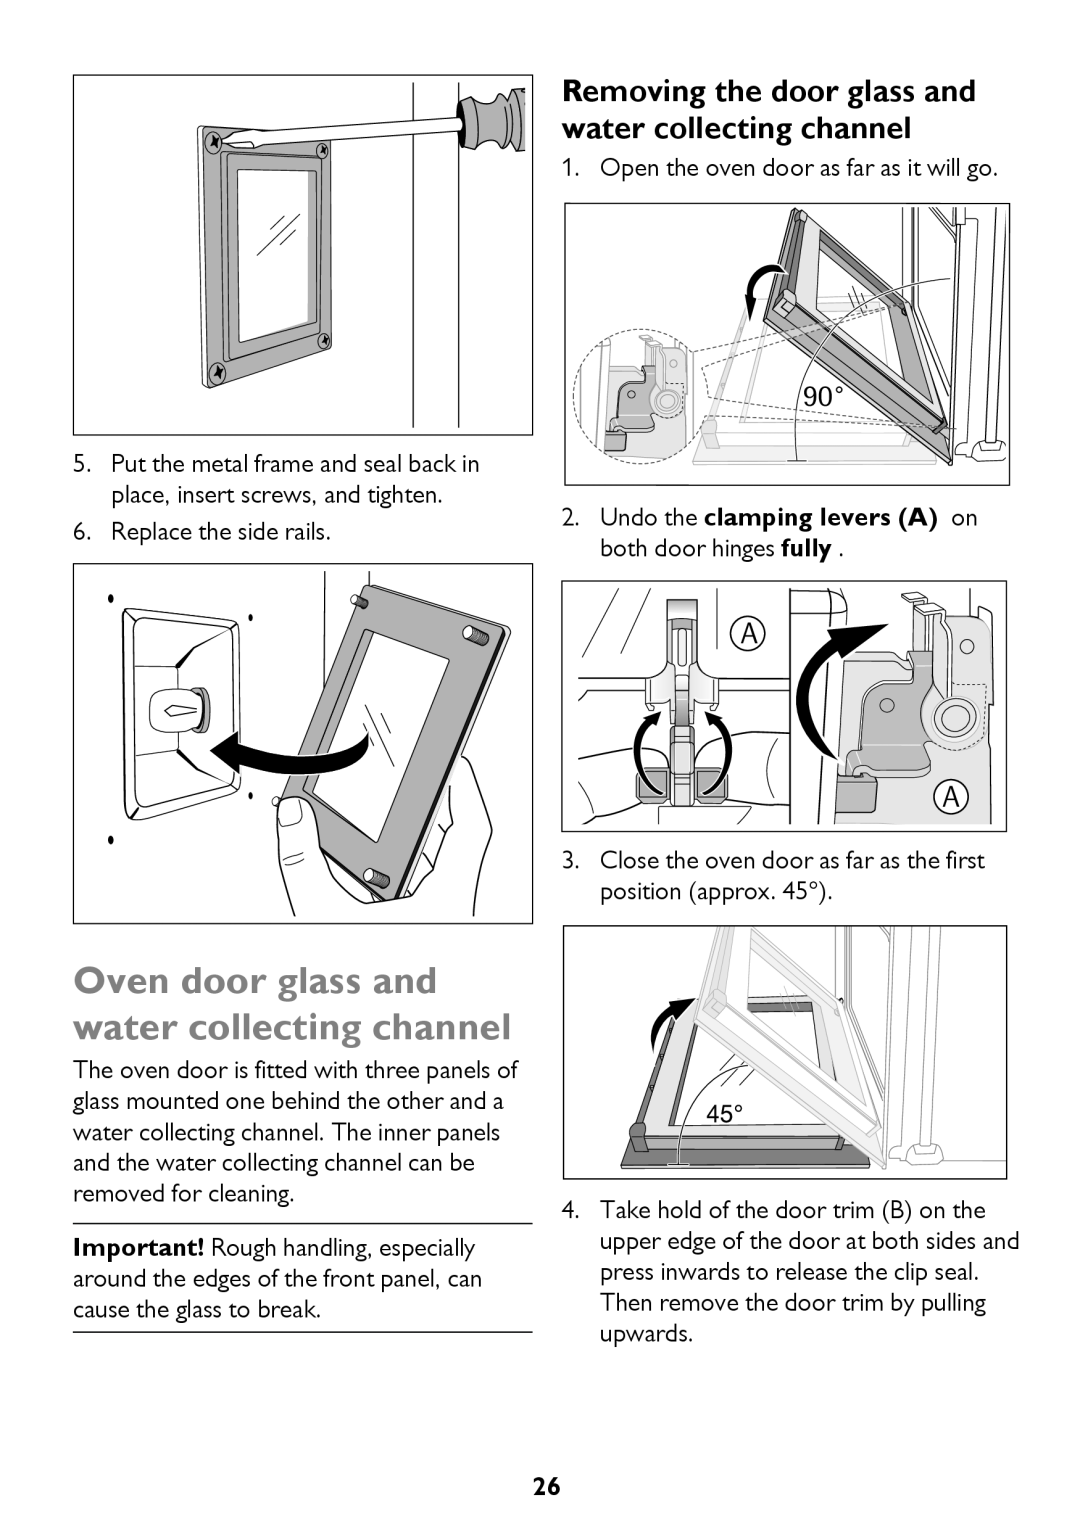 John Lewis JLBIOS610 instruction manual Oven door glass and water collecting channel 